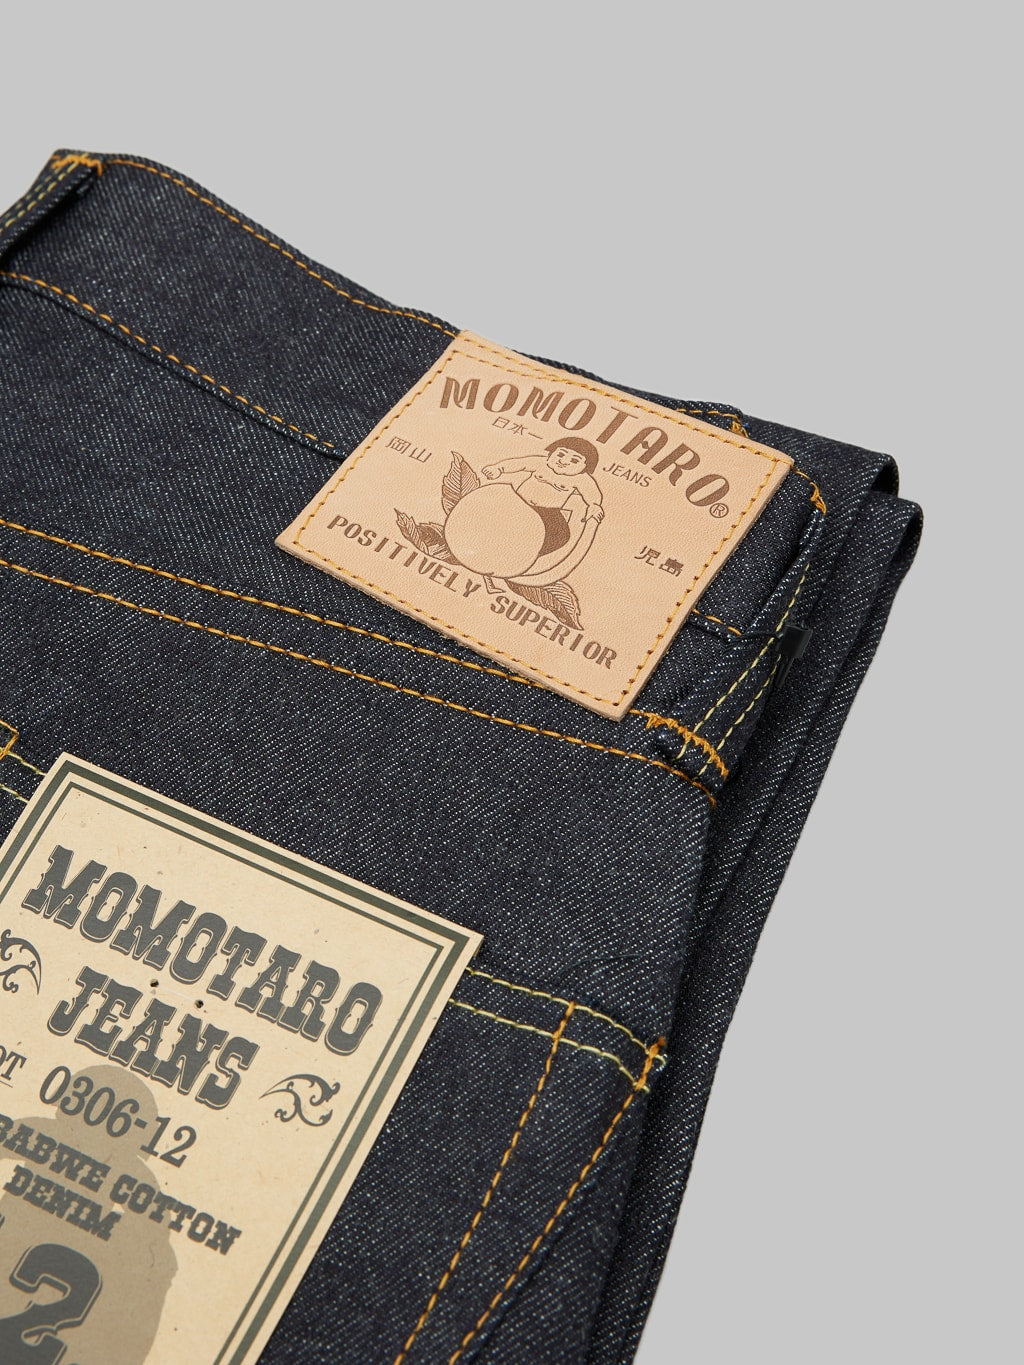 momotaro jeans 0306 12 12oz selvedge denim tight tapered leather patch